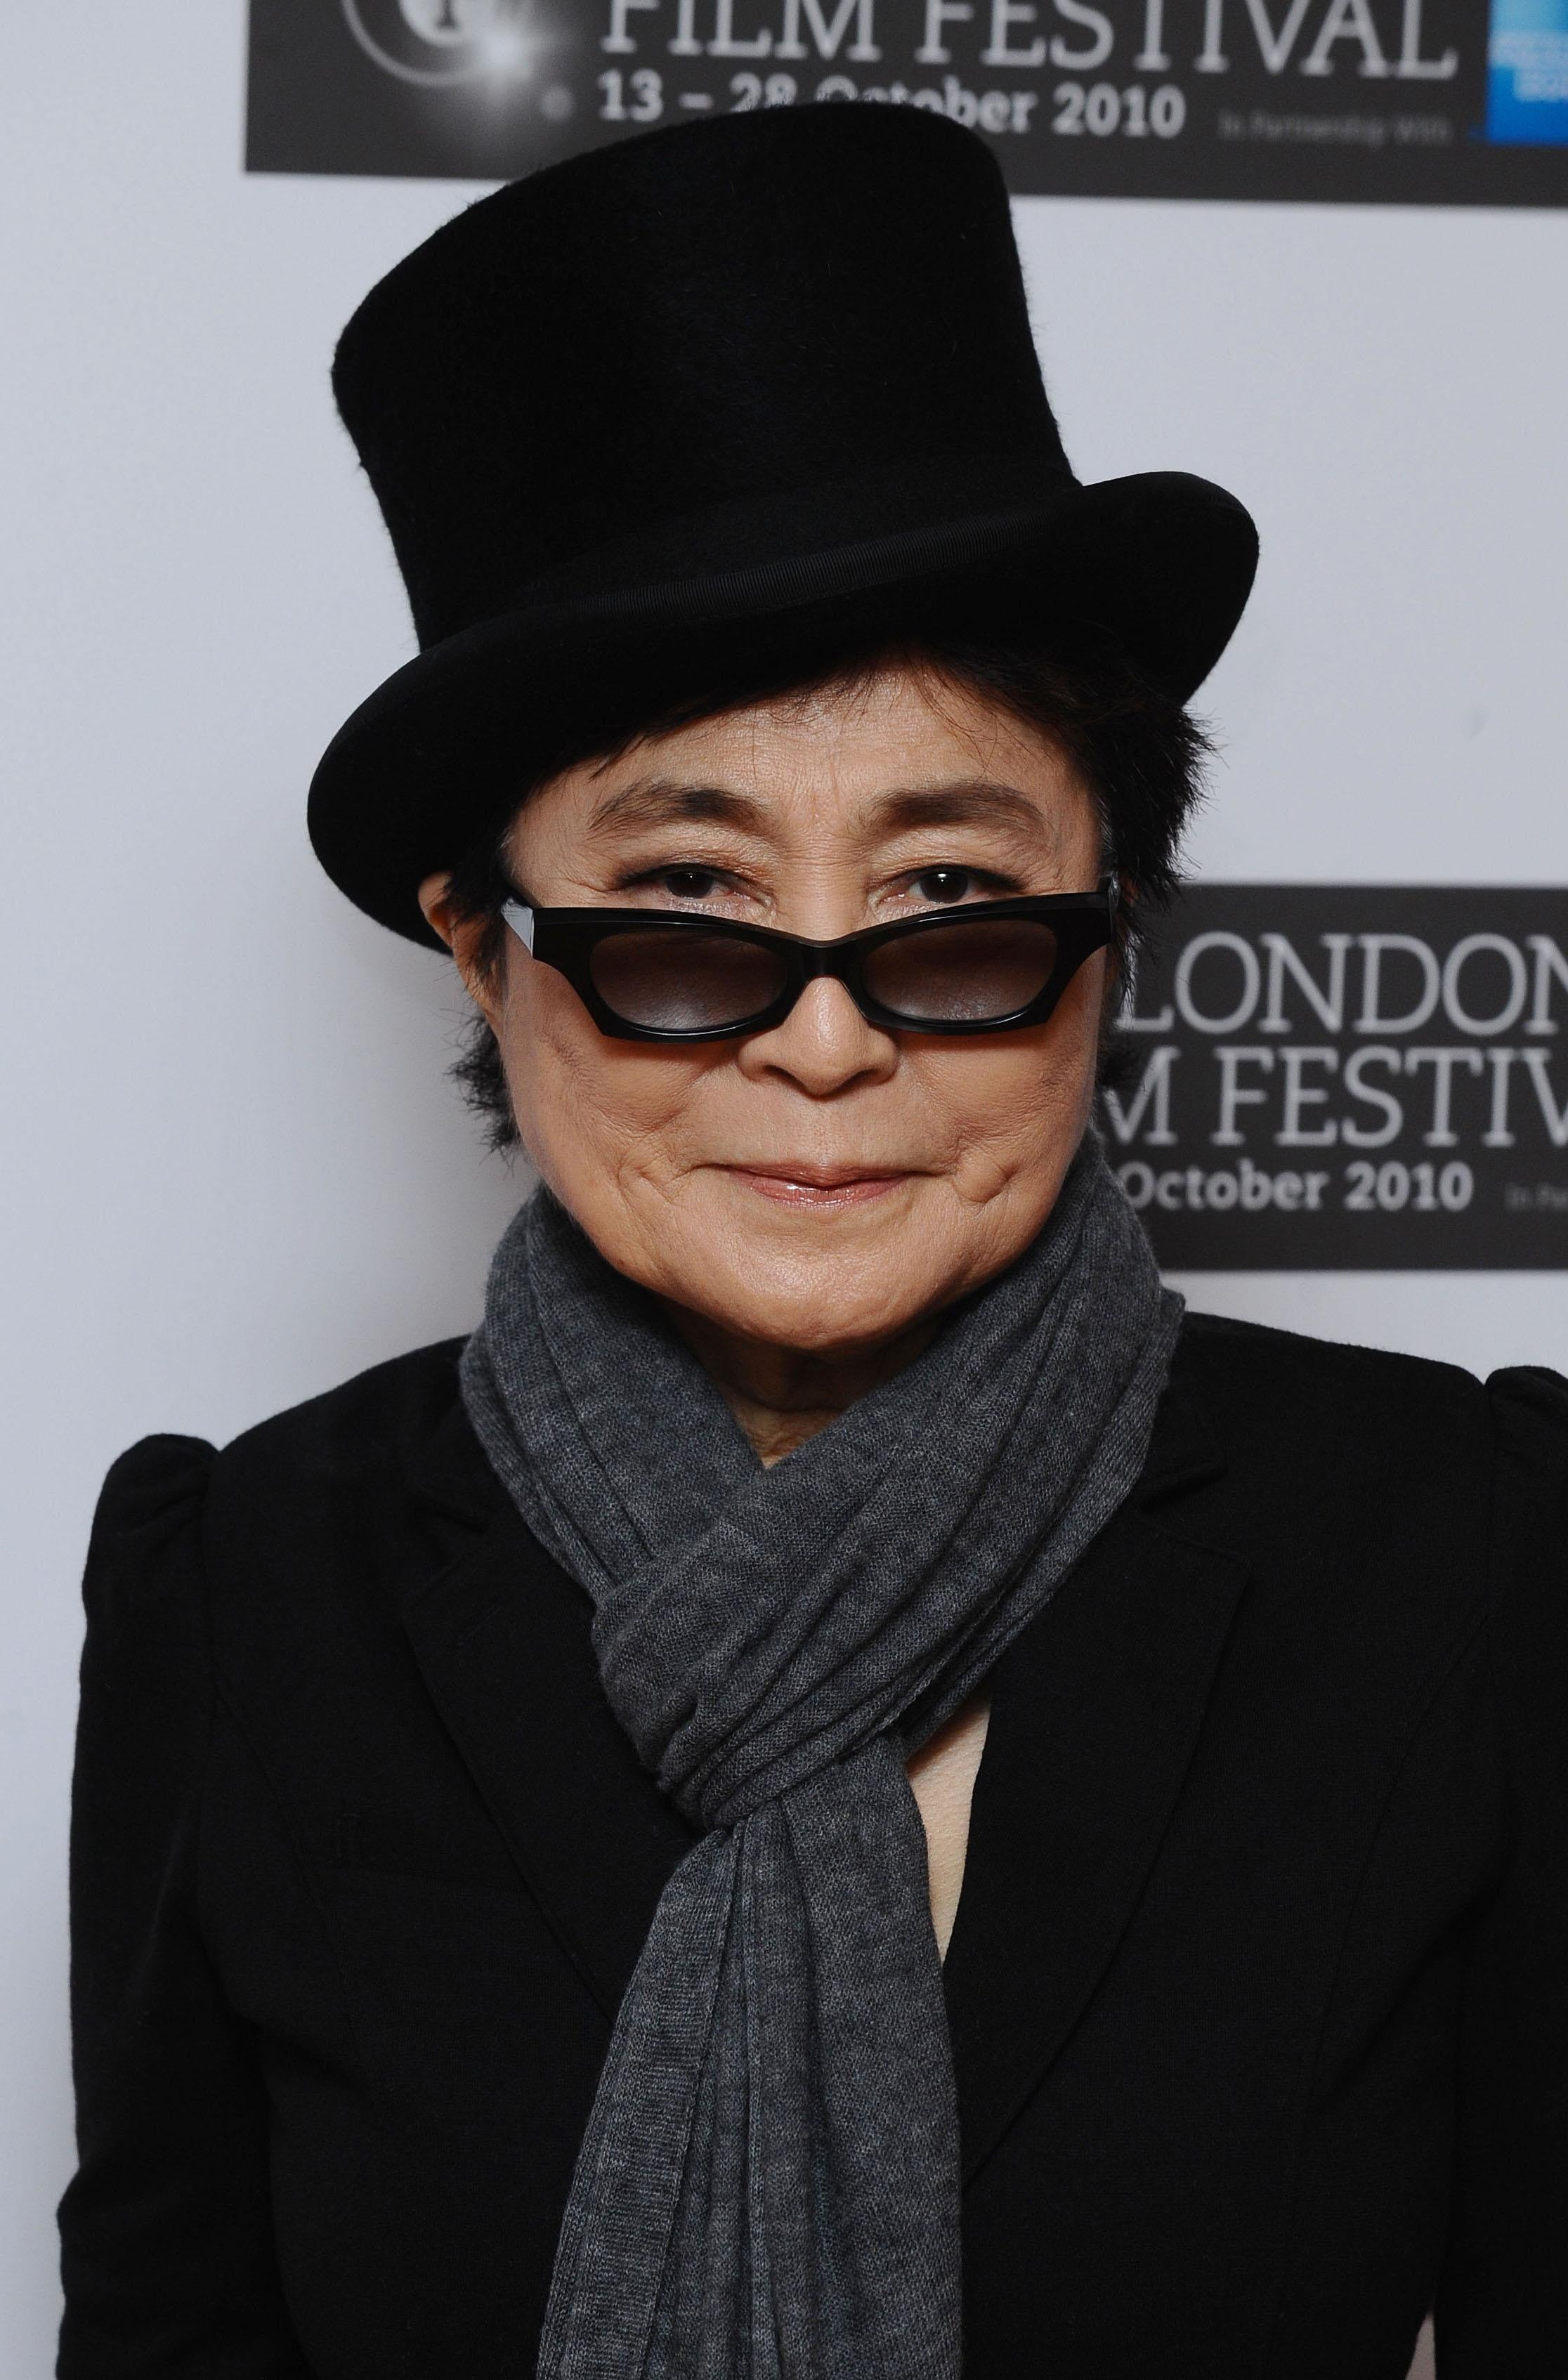 A new state-of-the-art performance centre at the Univeristy of Liverpool named in honour of Yoko Ono will open on Friday (Ian West/PA)